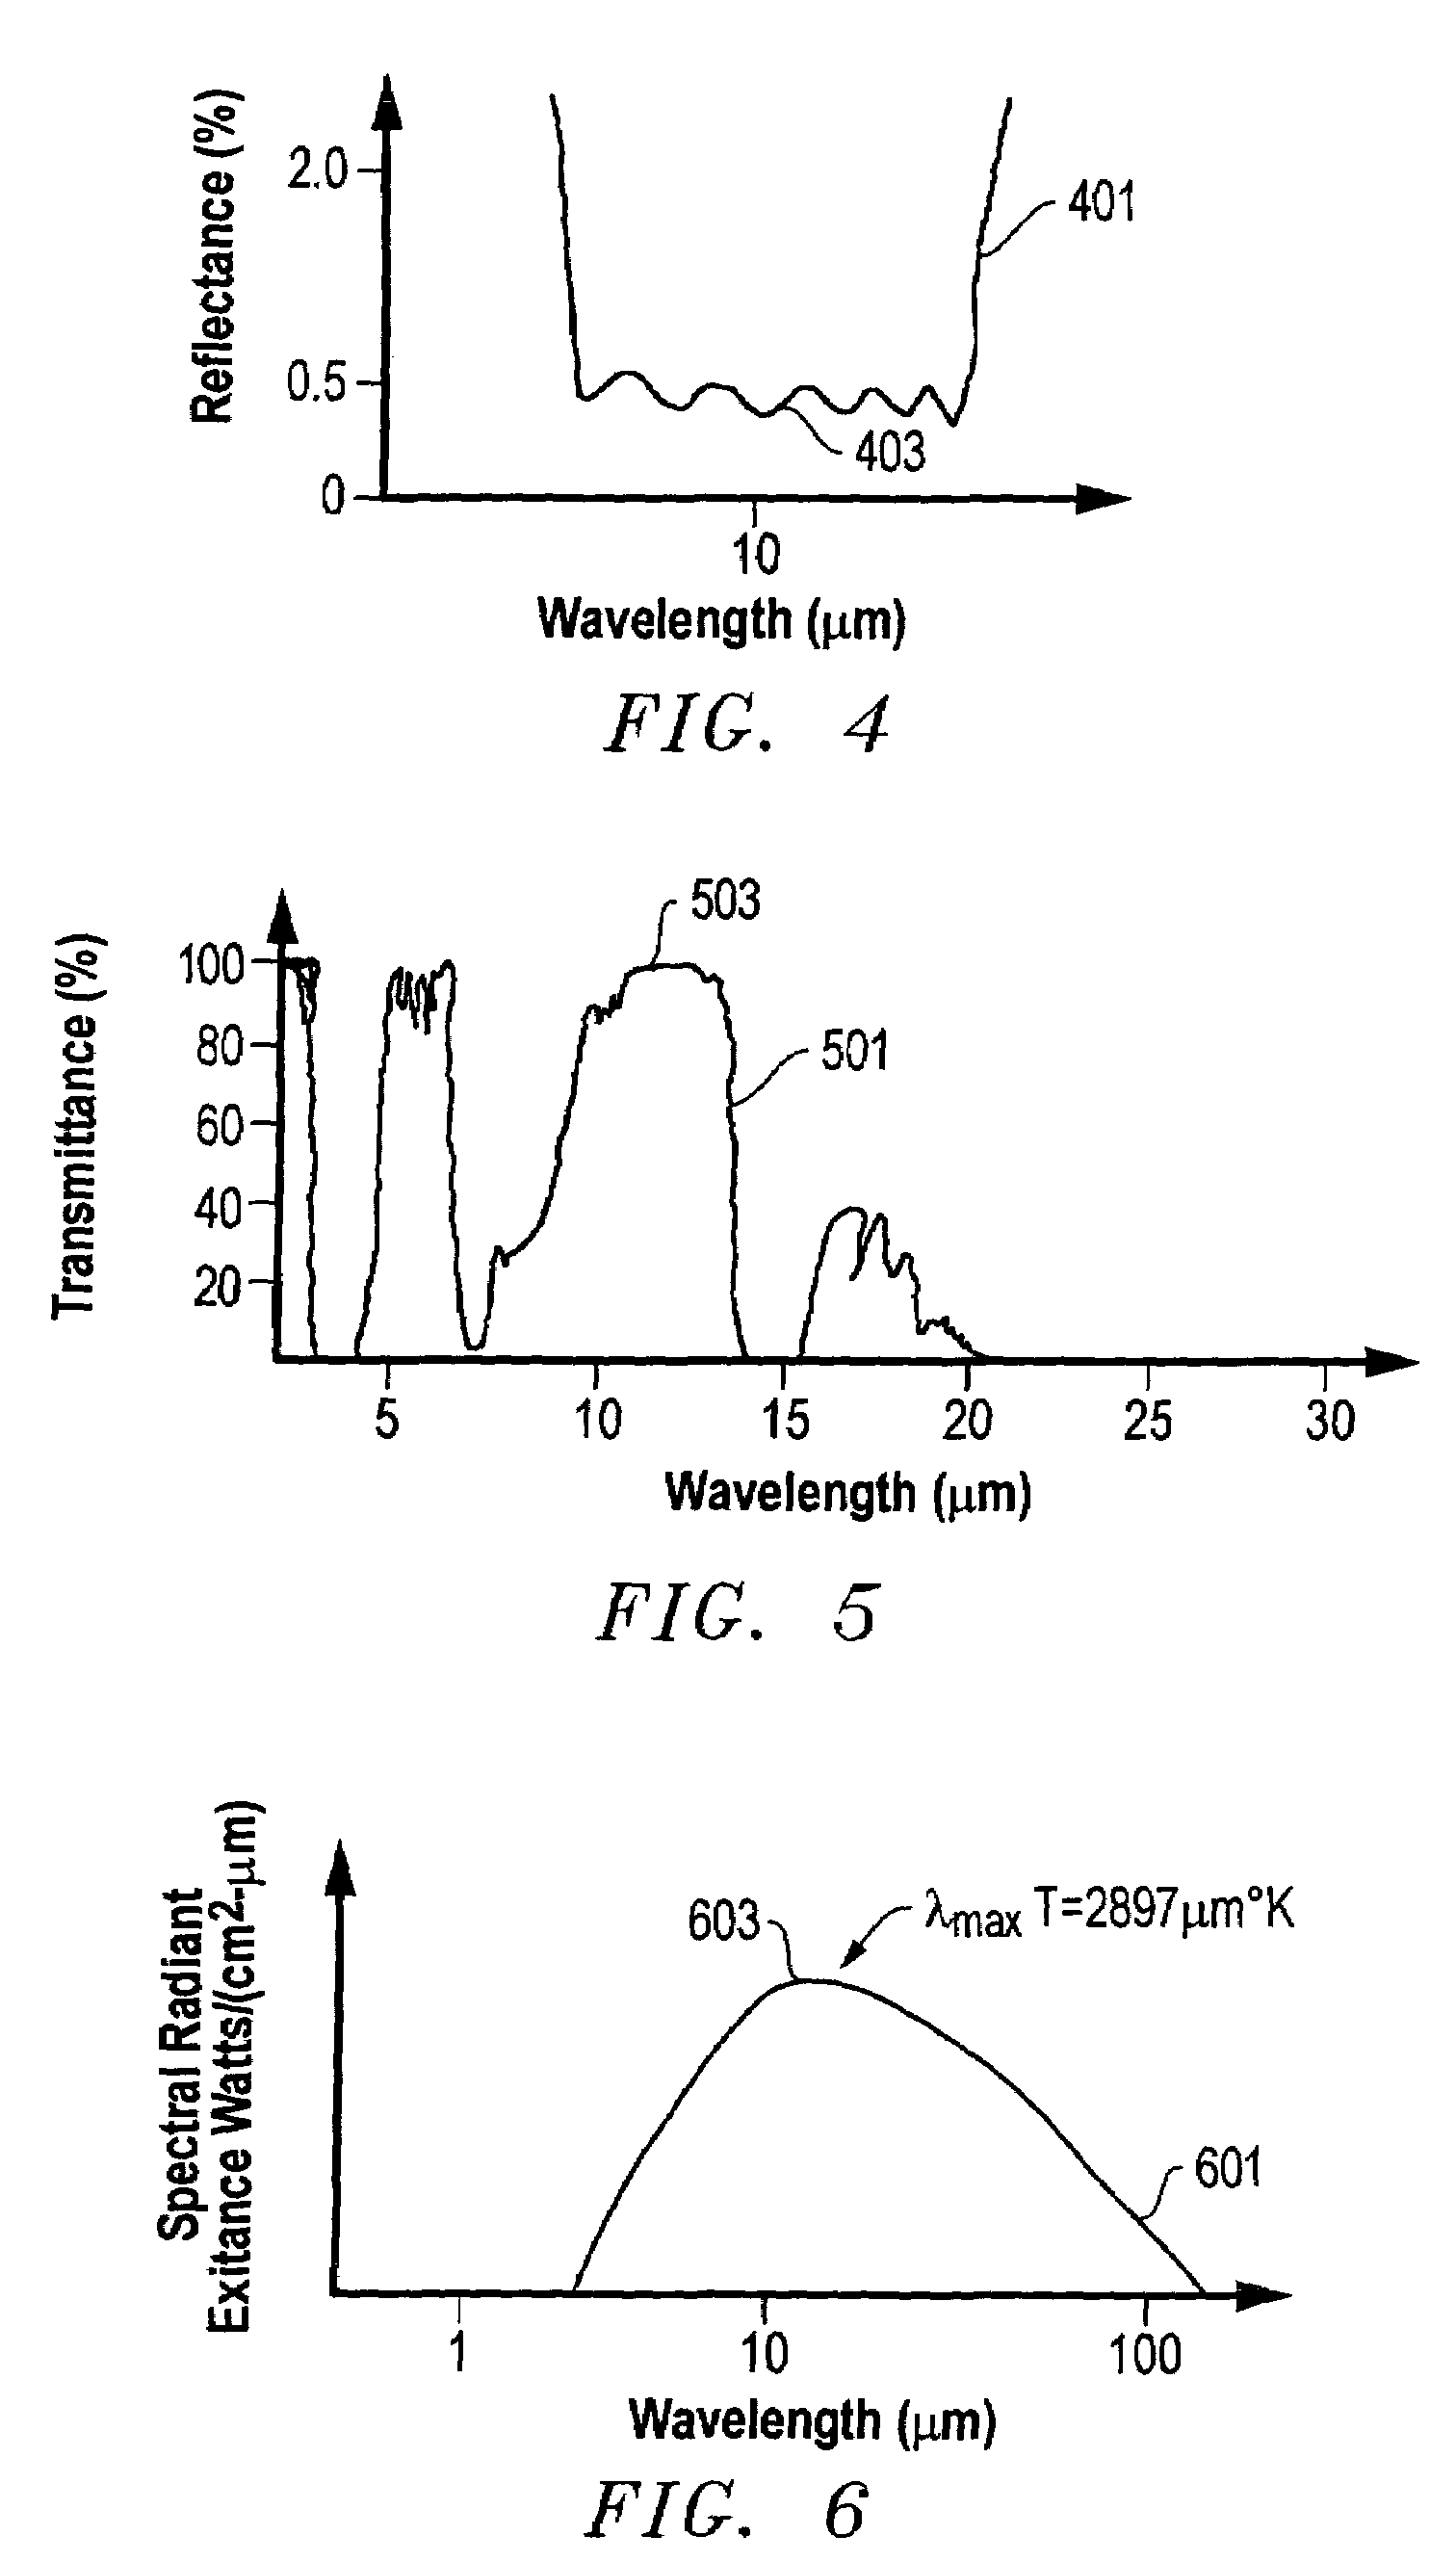 System, method, and apparatus for passive, multi-spectral, optical identification of remote objects